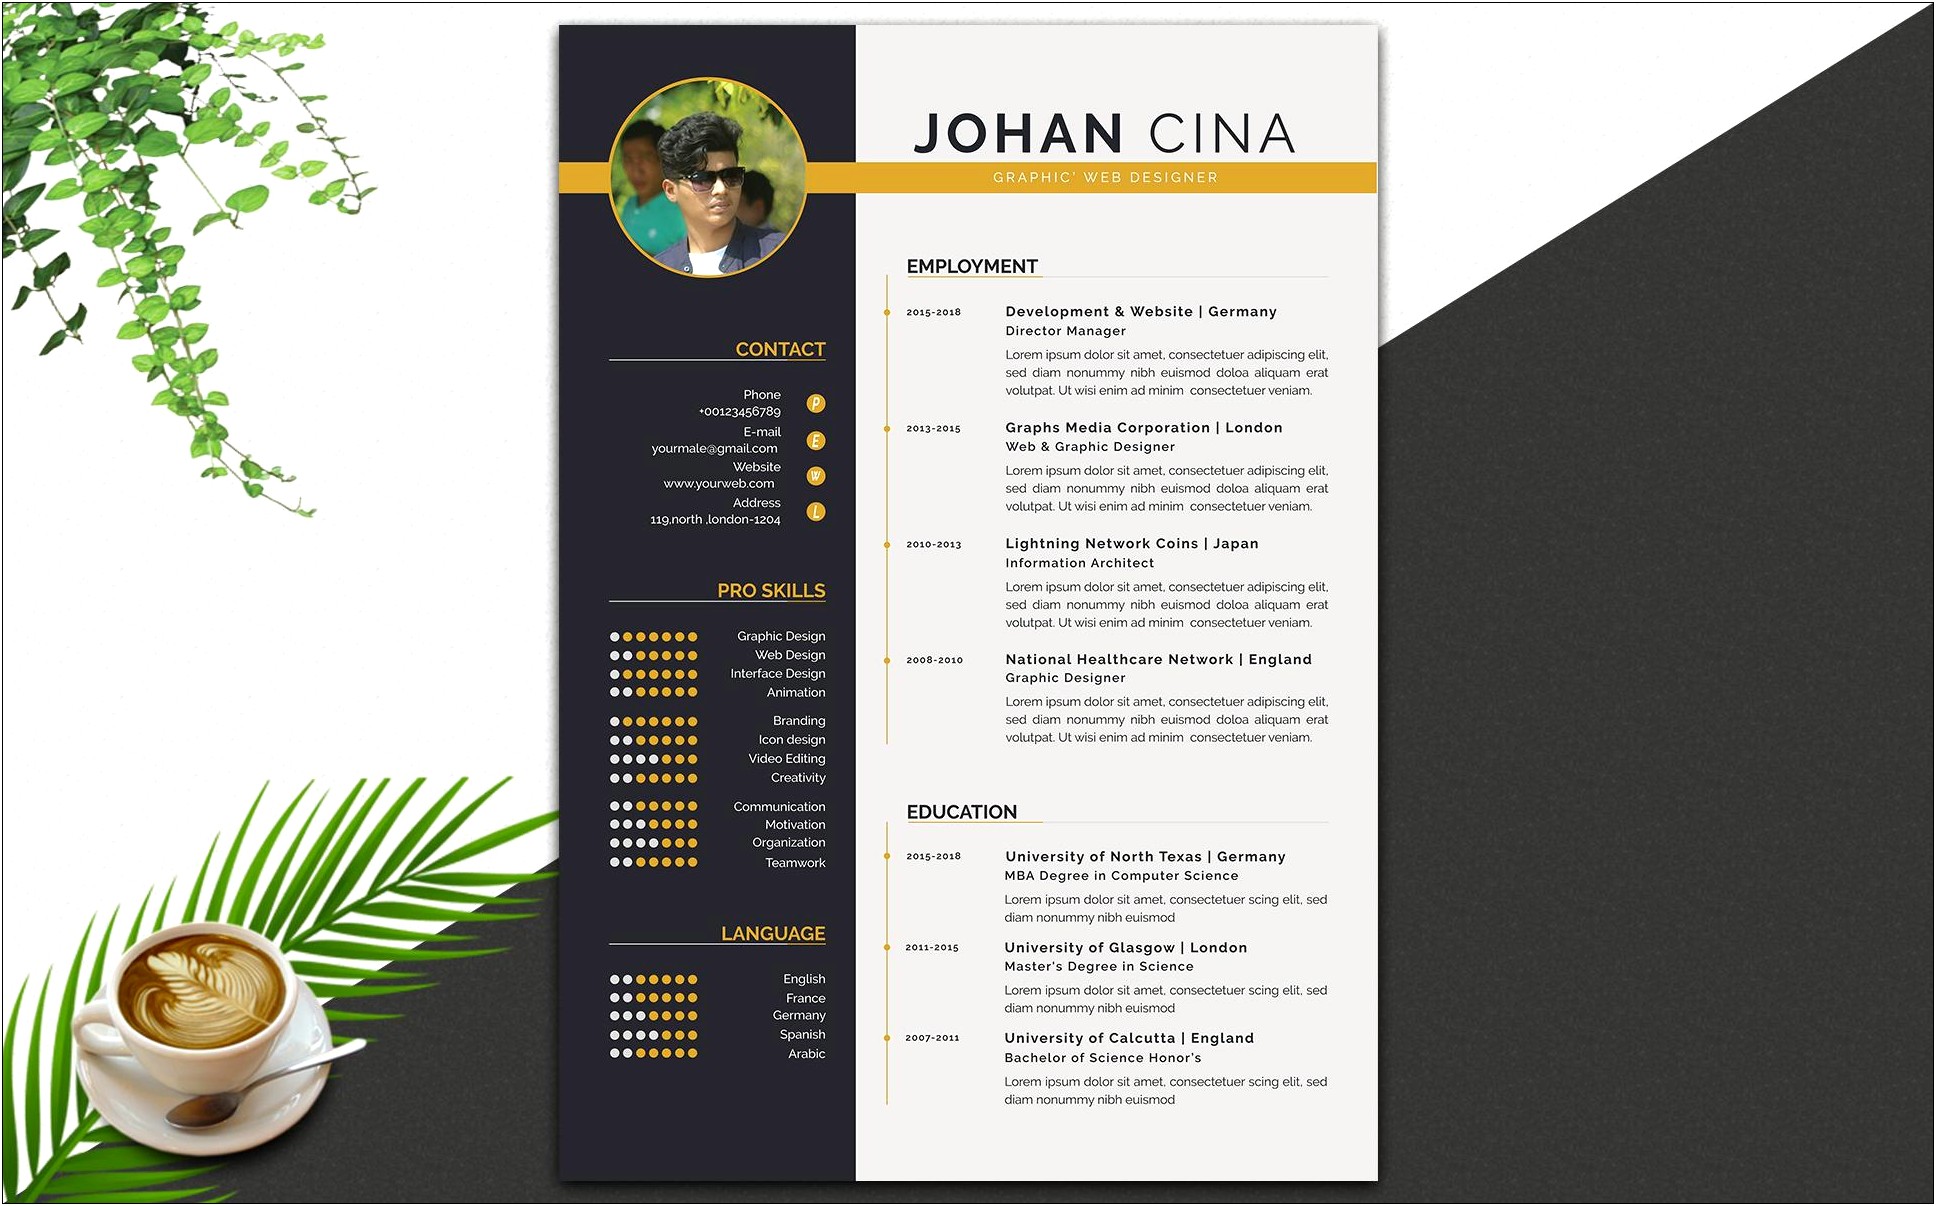 Coffee Manager Resume Samples 2018